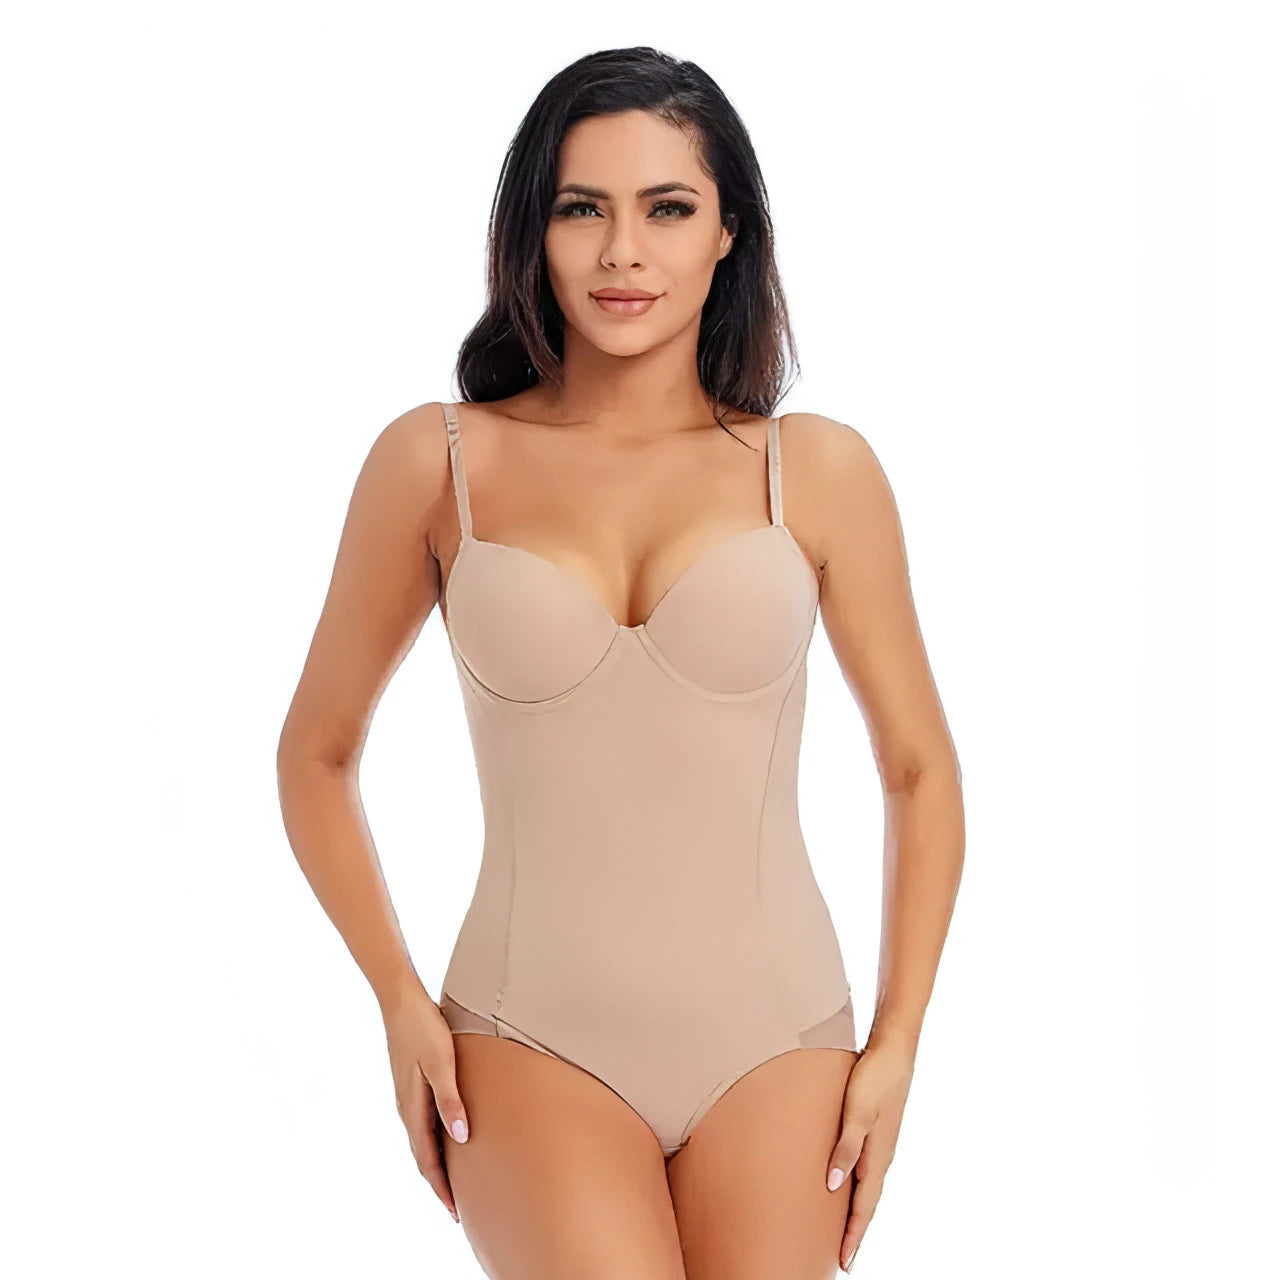 Reductive Slimming Bodysuit with Cup - Allure SocietyShapewear